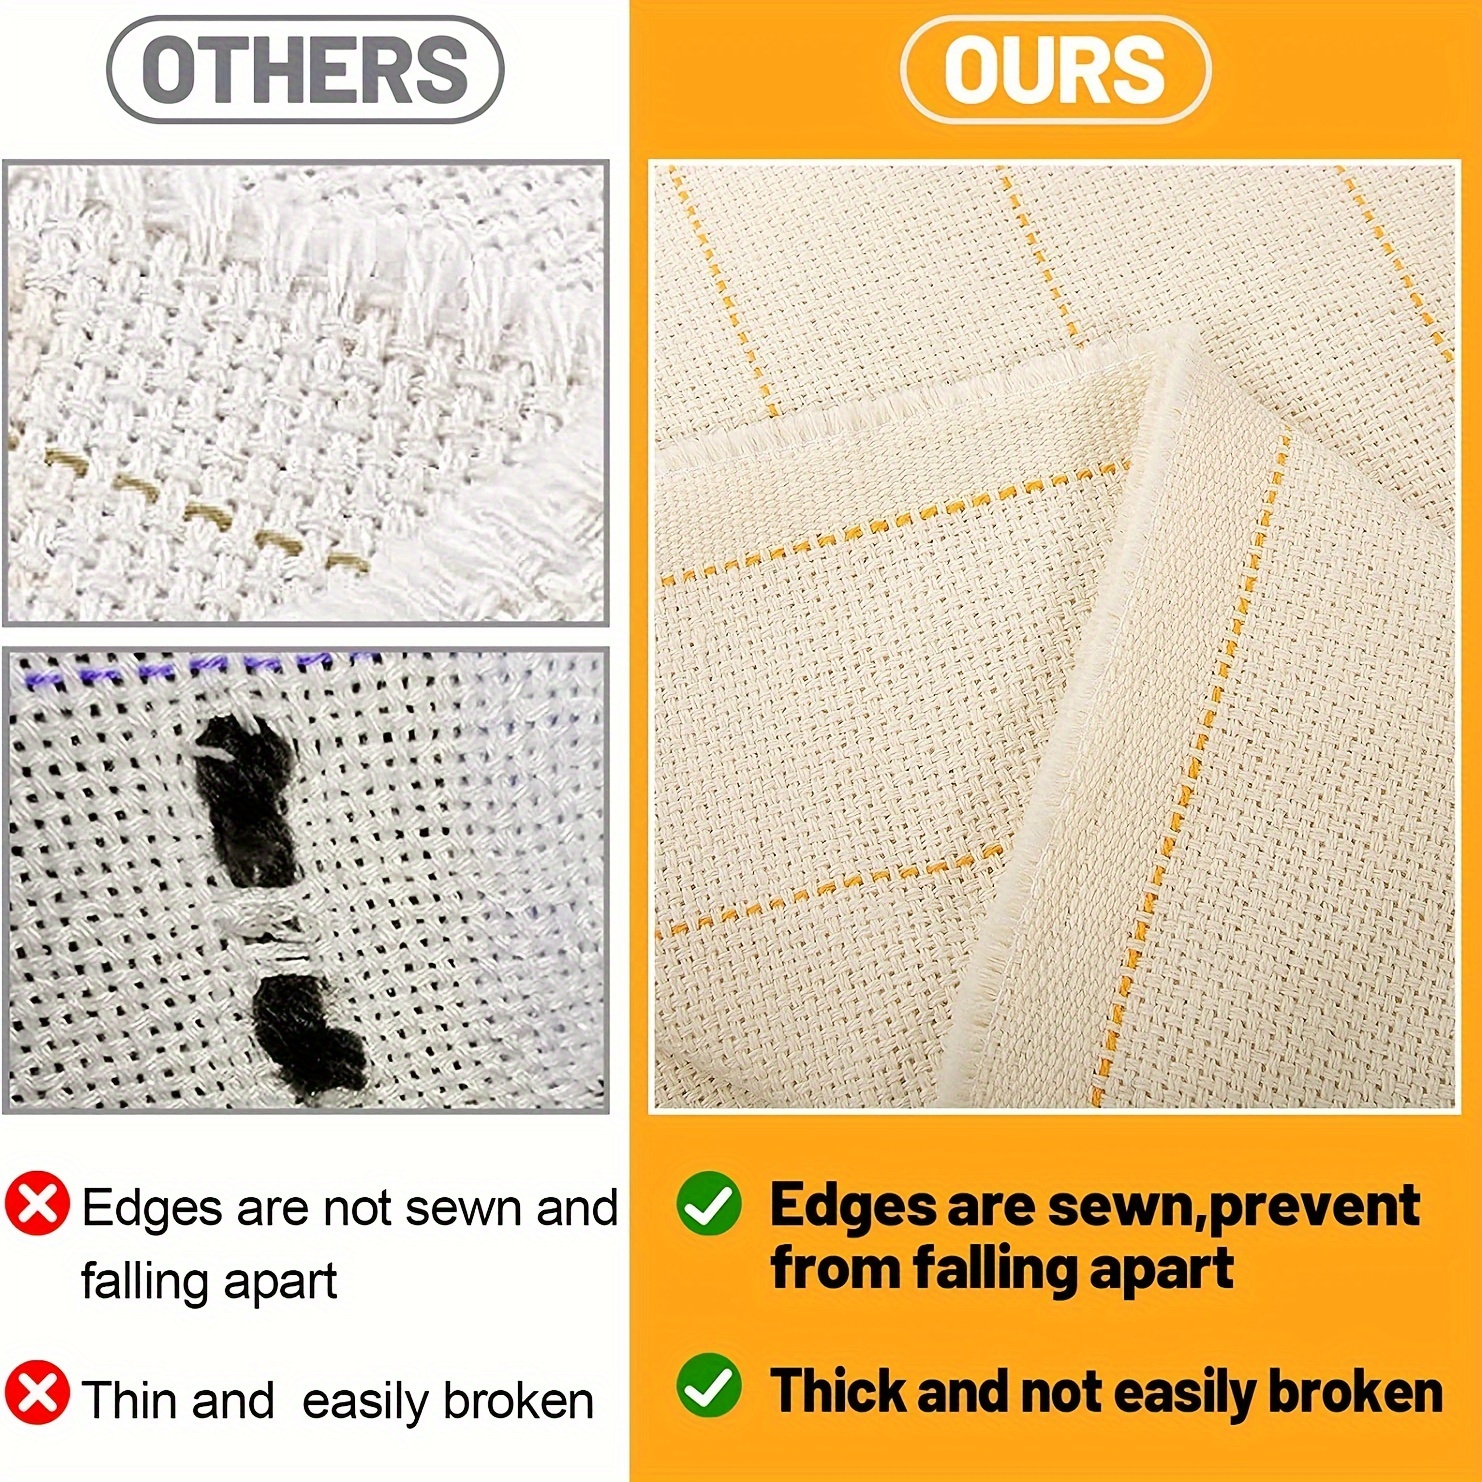  80*59 Primary Tufting Cloth with Marked Lines -  BESGEER-Carpet-Tufting-Fabric, Larger Overlocking Monks Cloth for Tufting  Gun, Rug Tufting Cloth for Punch Needle : Arts, Crafts & Sewing